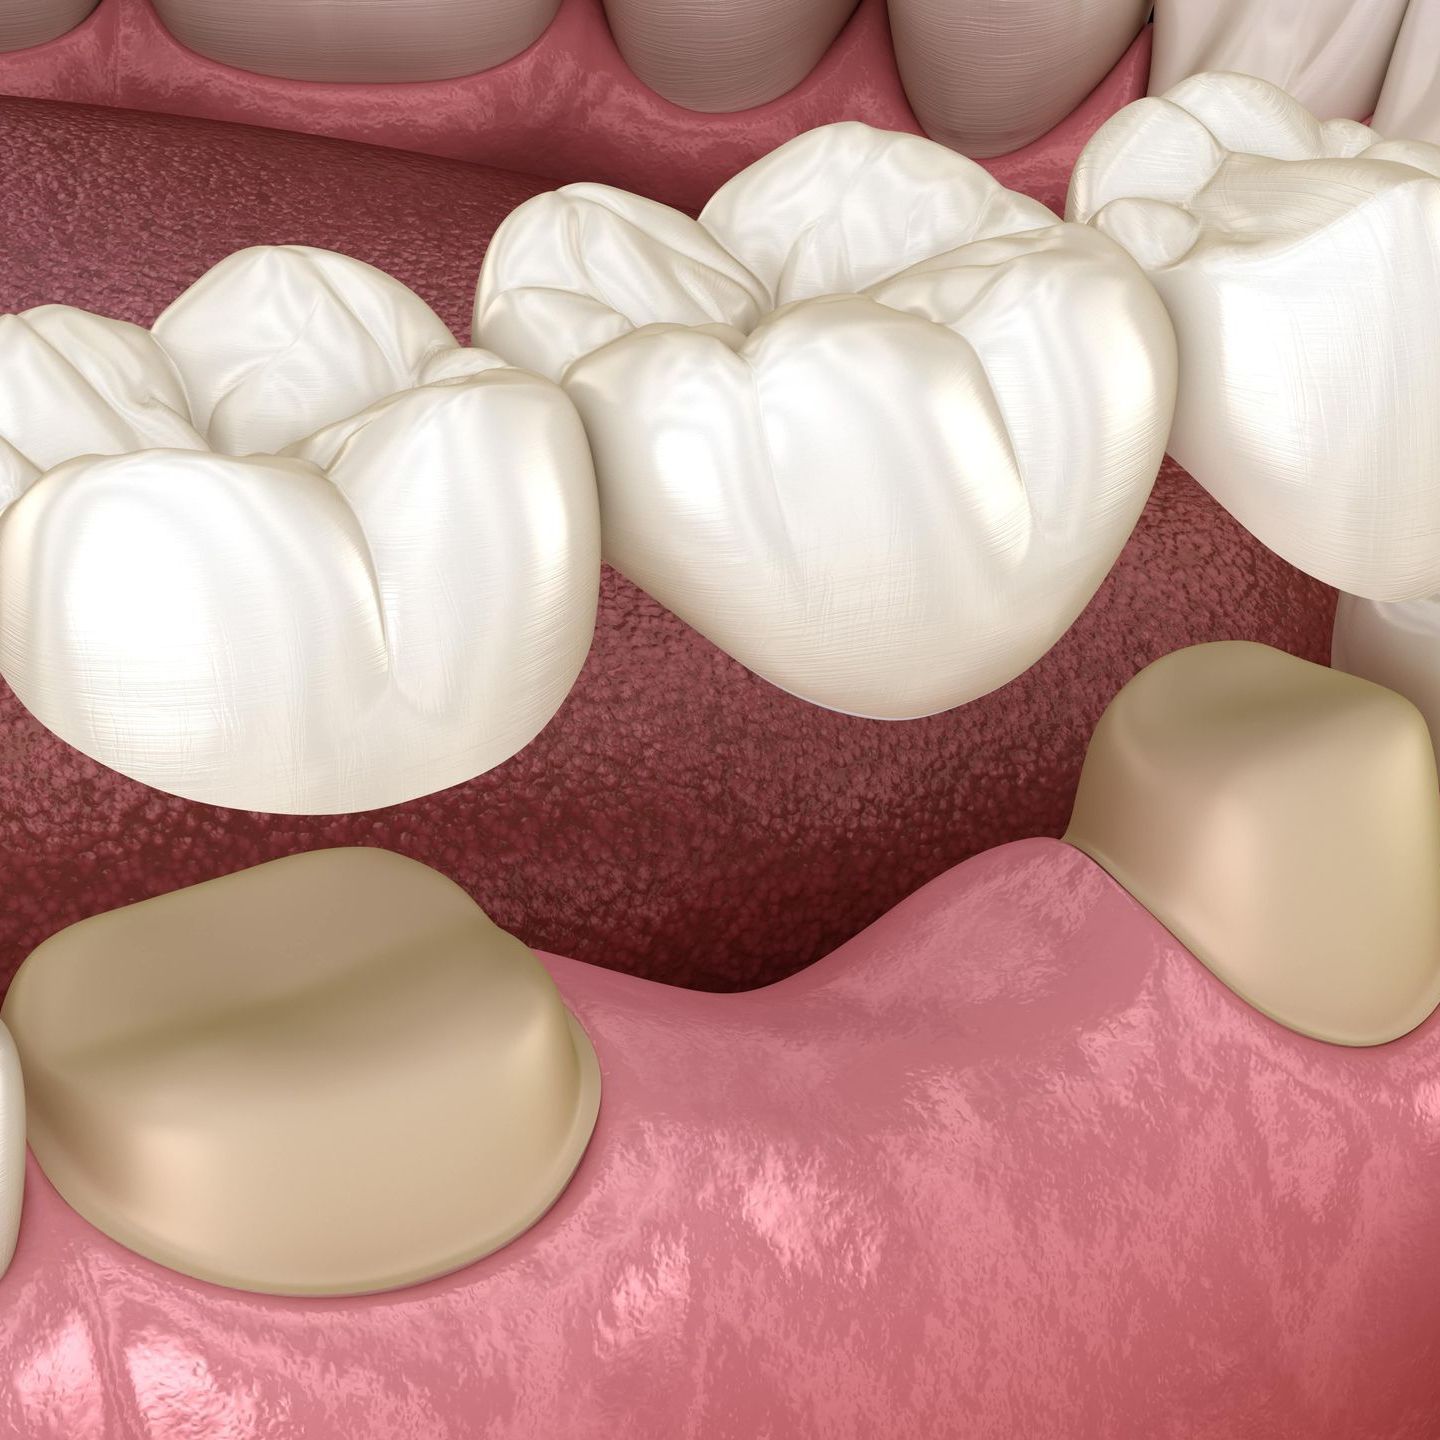 A computer generated image of a dental bridge on top of the missing area of teeth